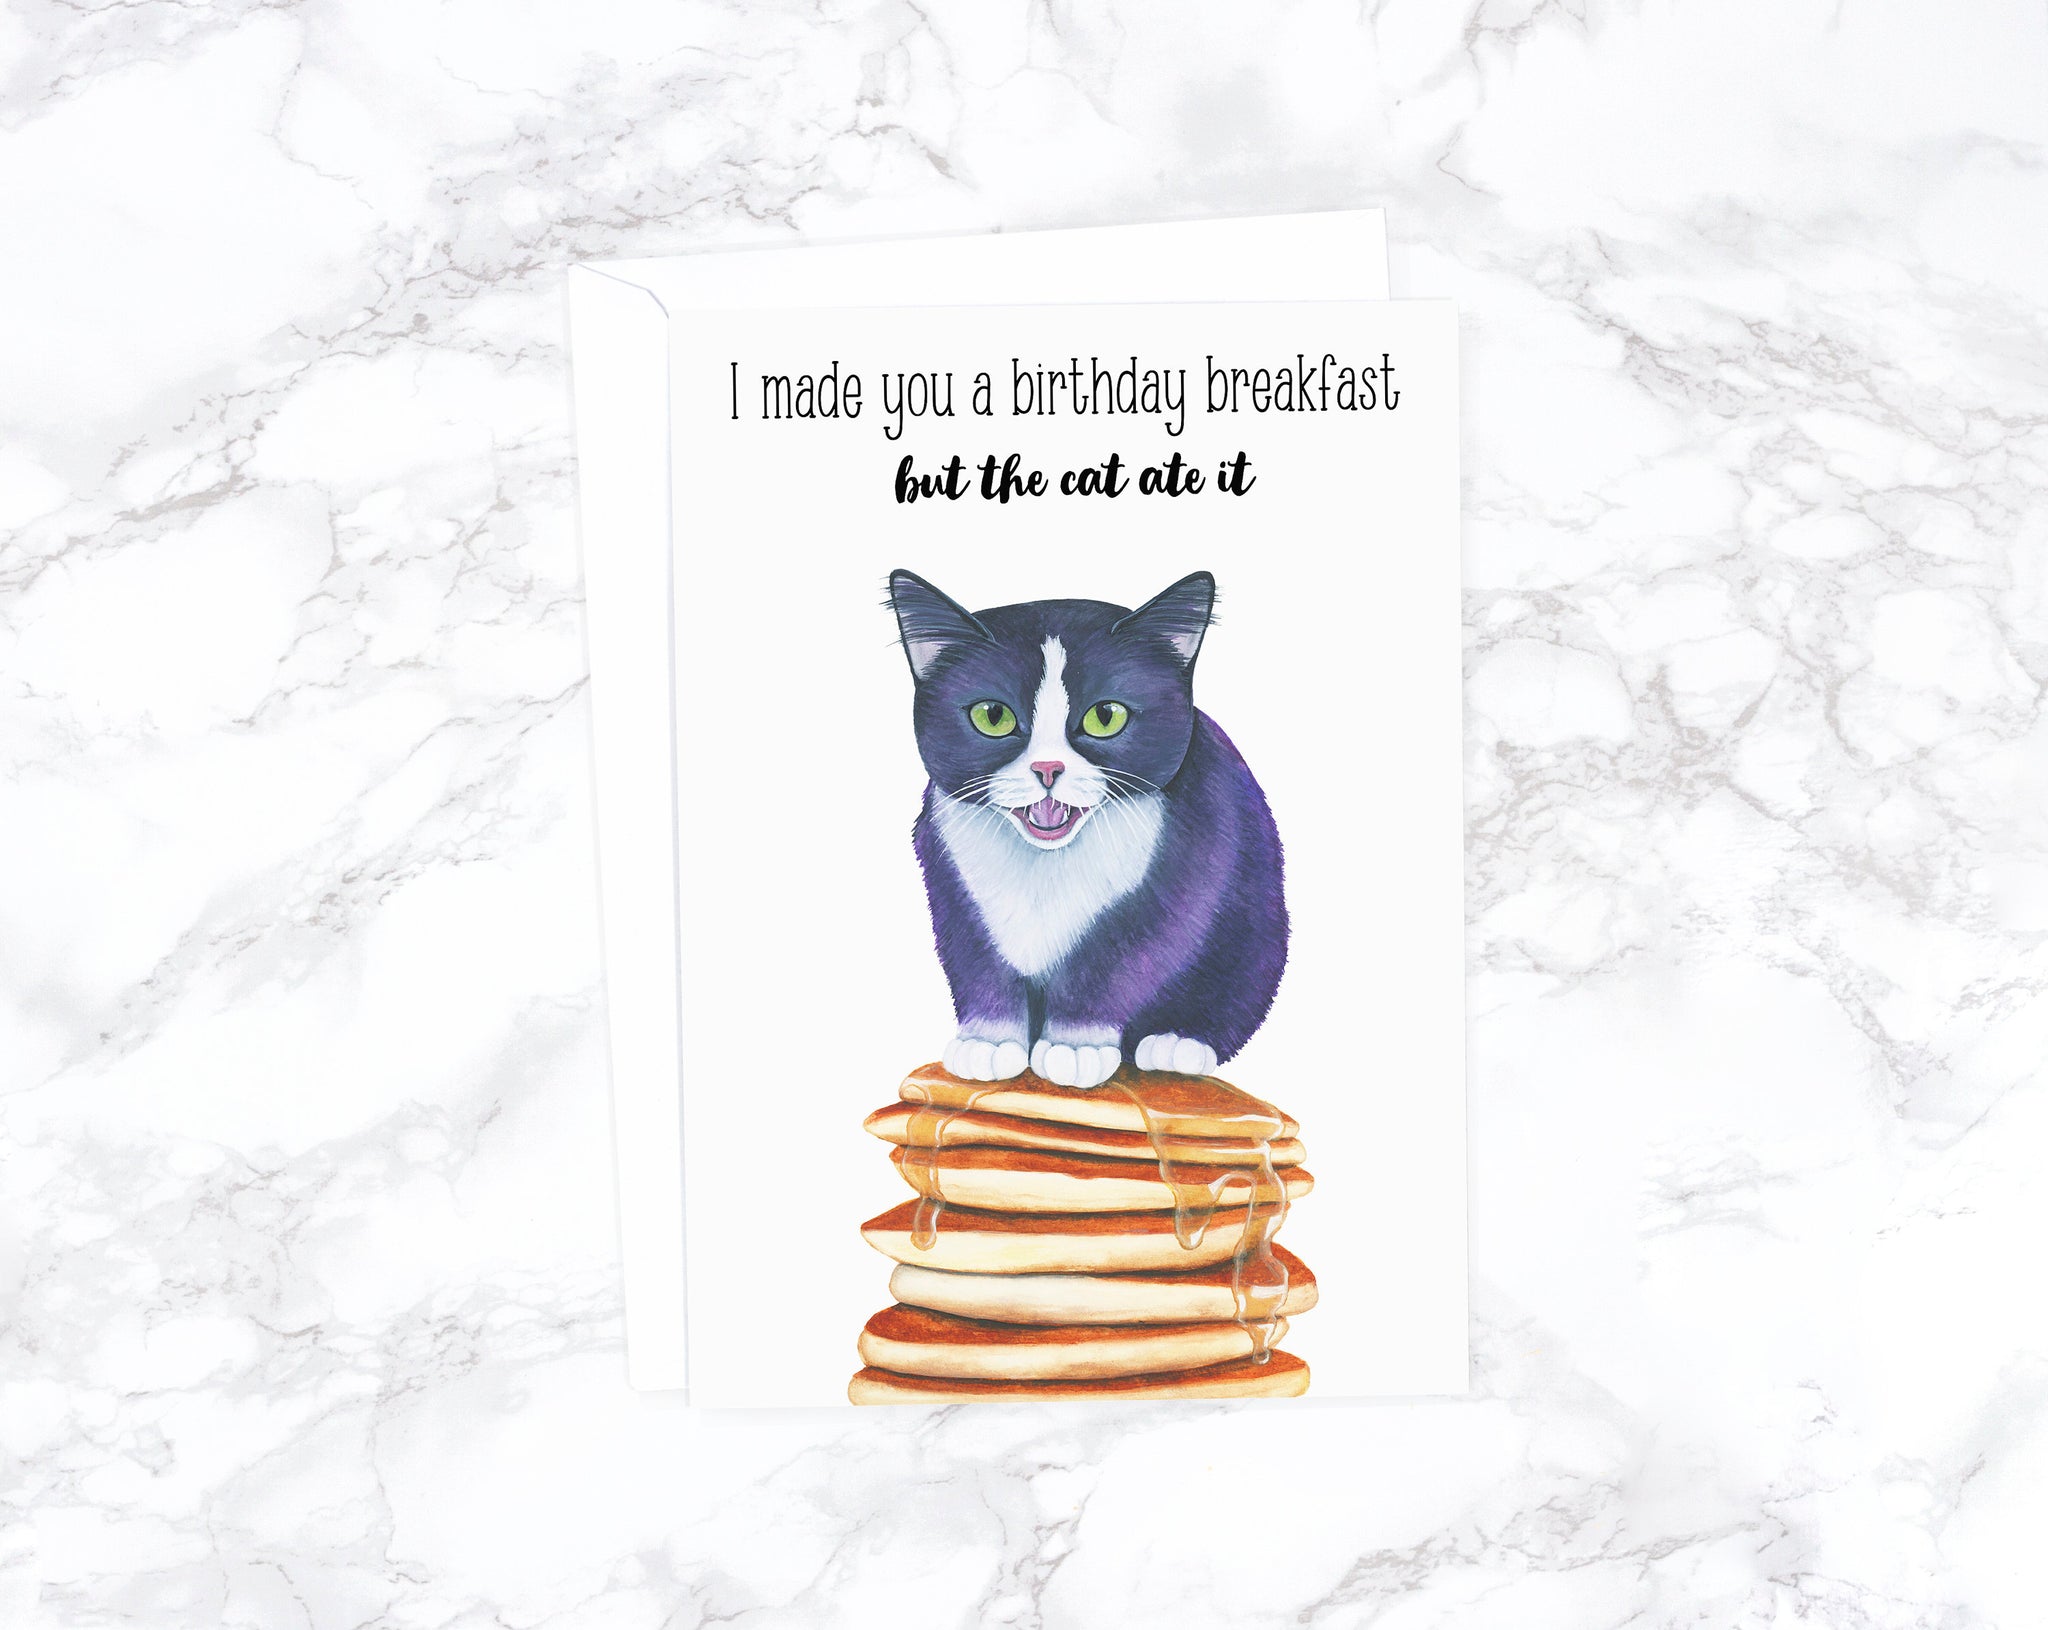 I made you a birthday breakfast but the cat ate it